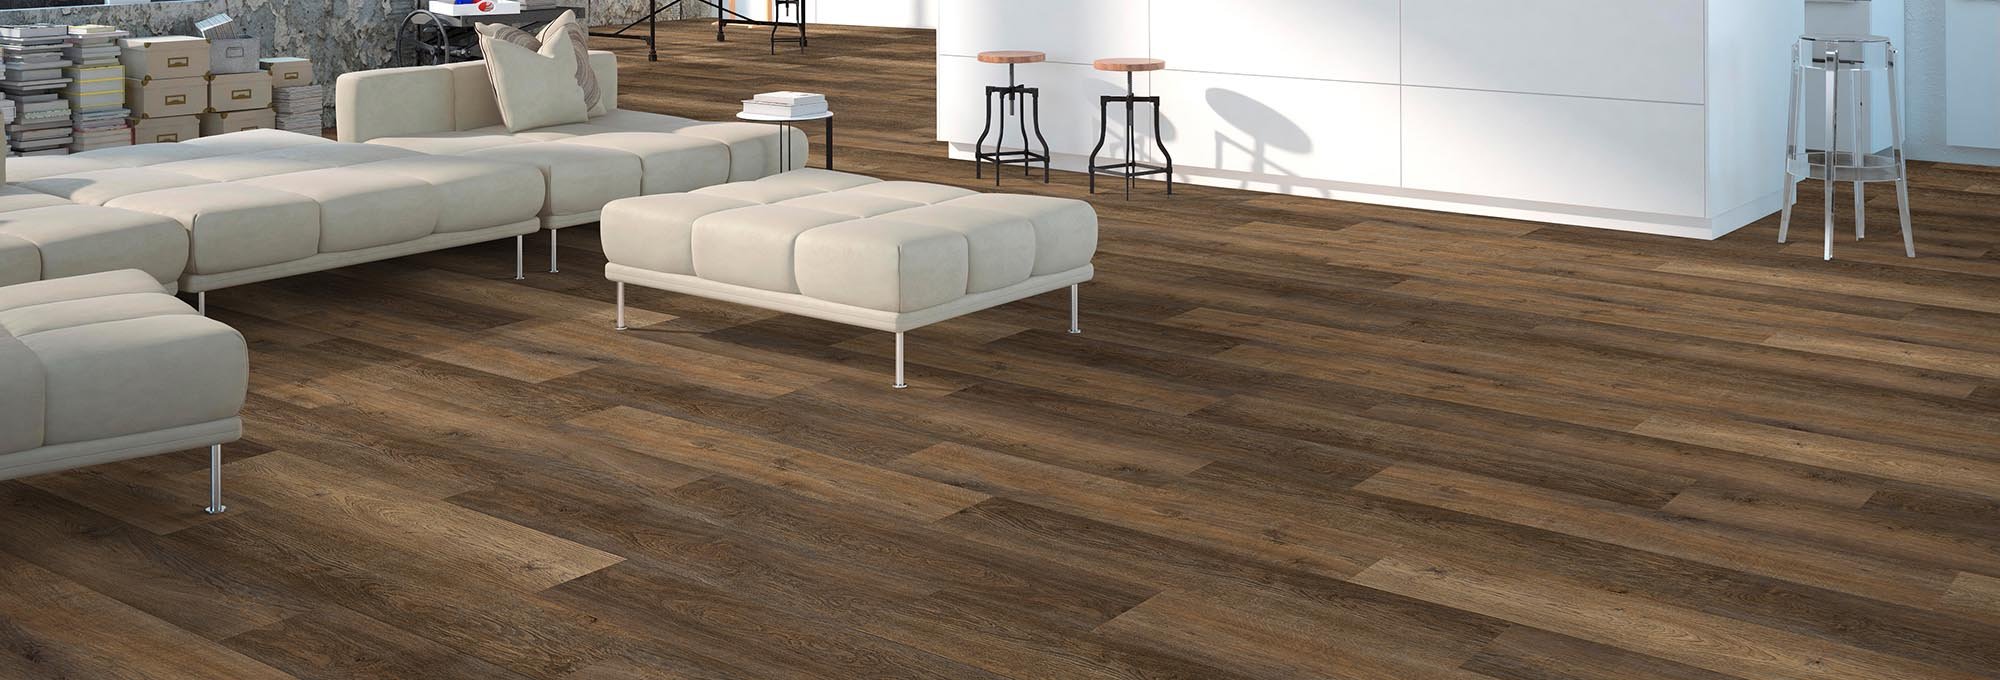 Shop Flooring Products from CarpetsPlus by Design in Woodville, WI